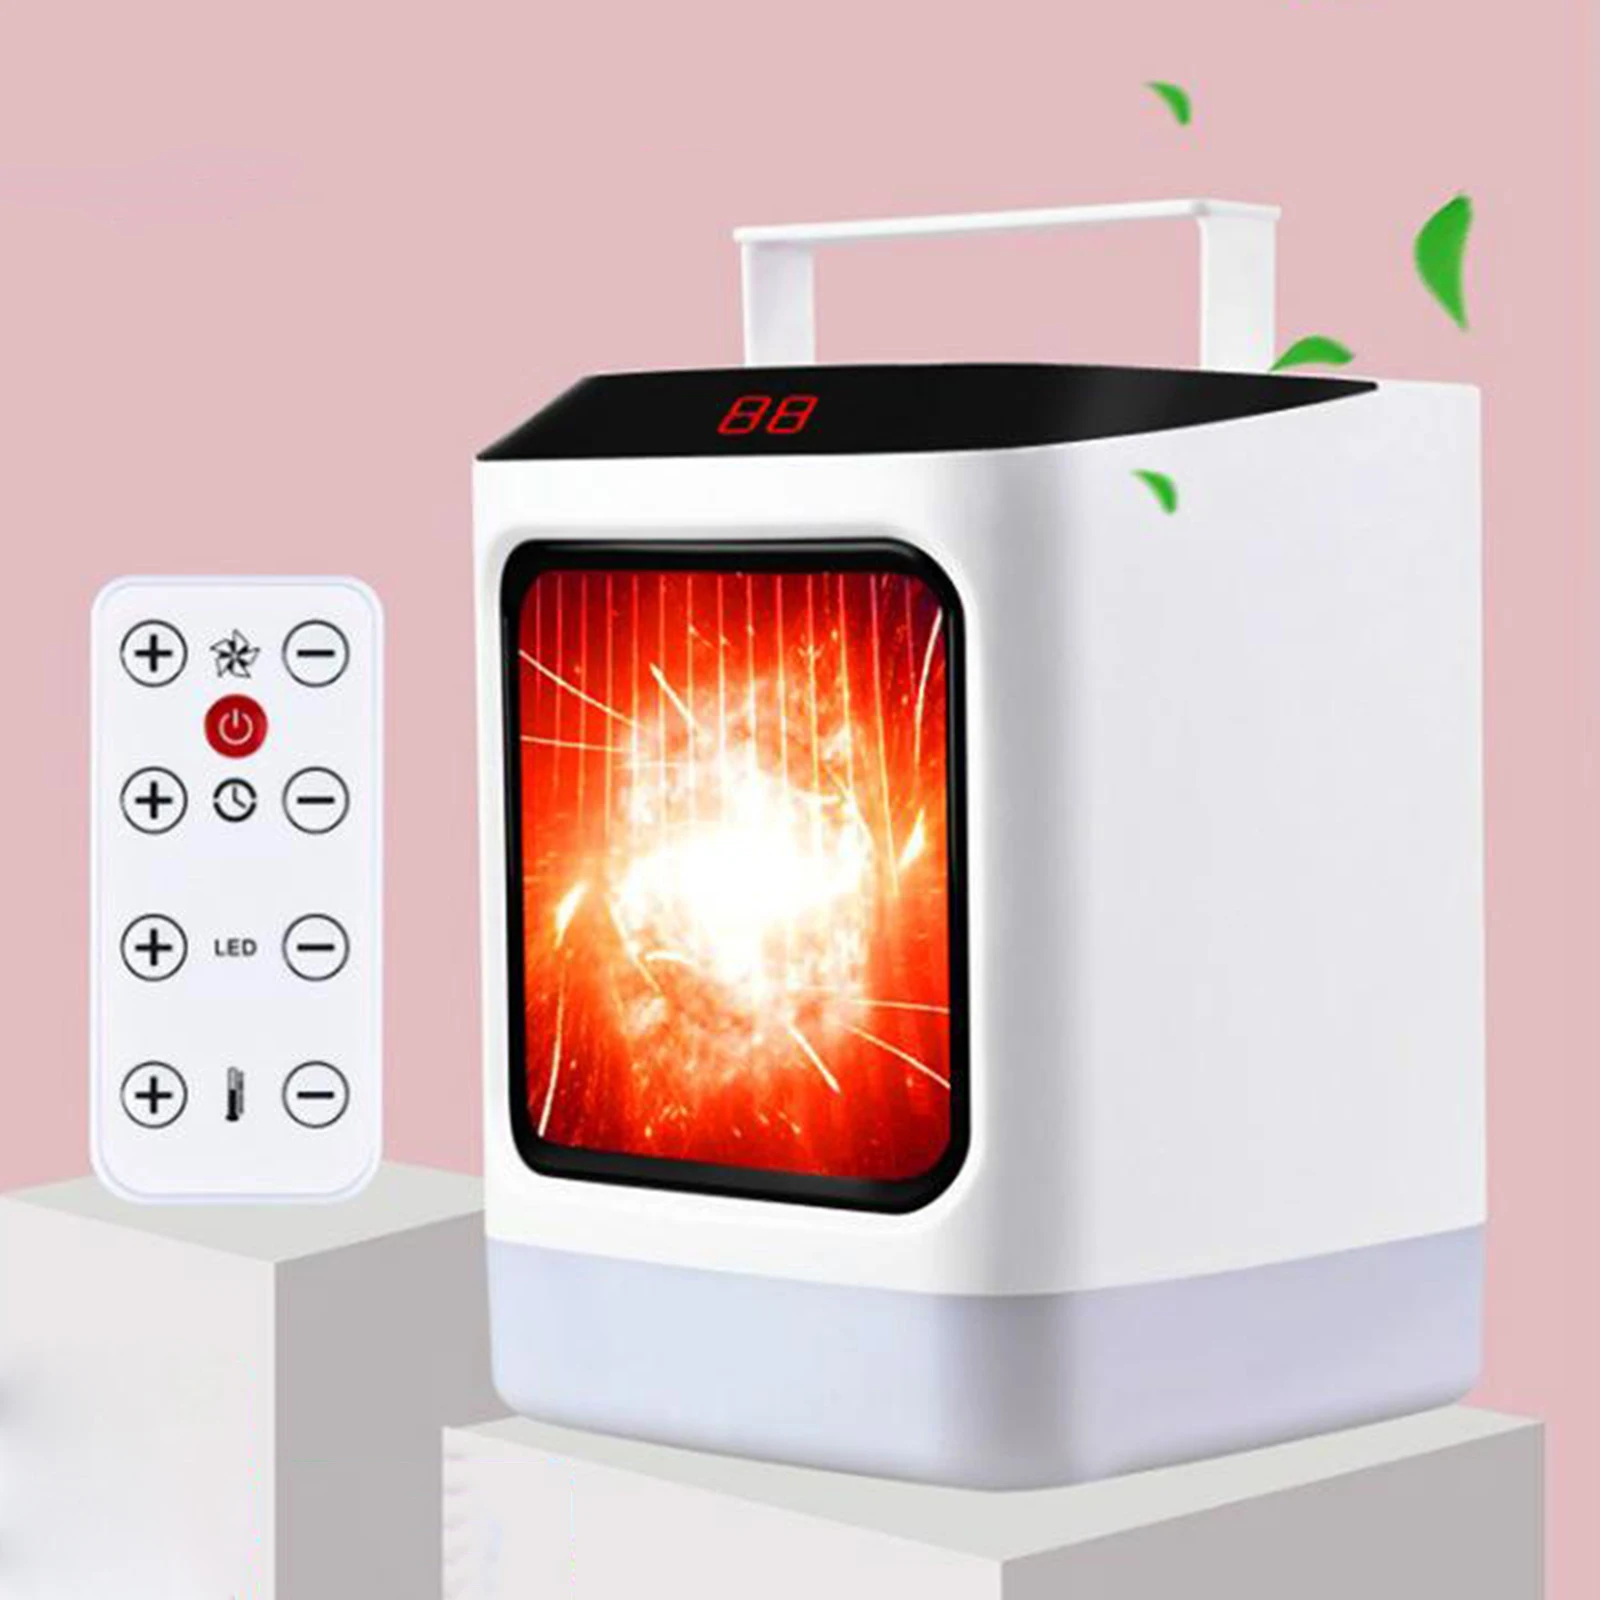 

800W Portable Electric Ceramic Quiet Space Heater Fan Thermostat Fast Heating Small Portable Electric Office Desk